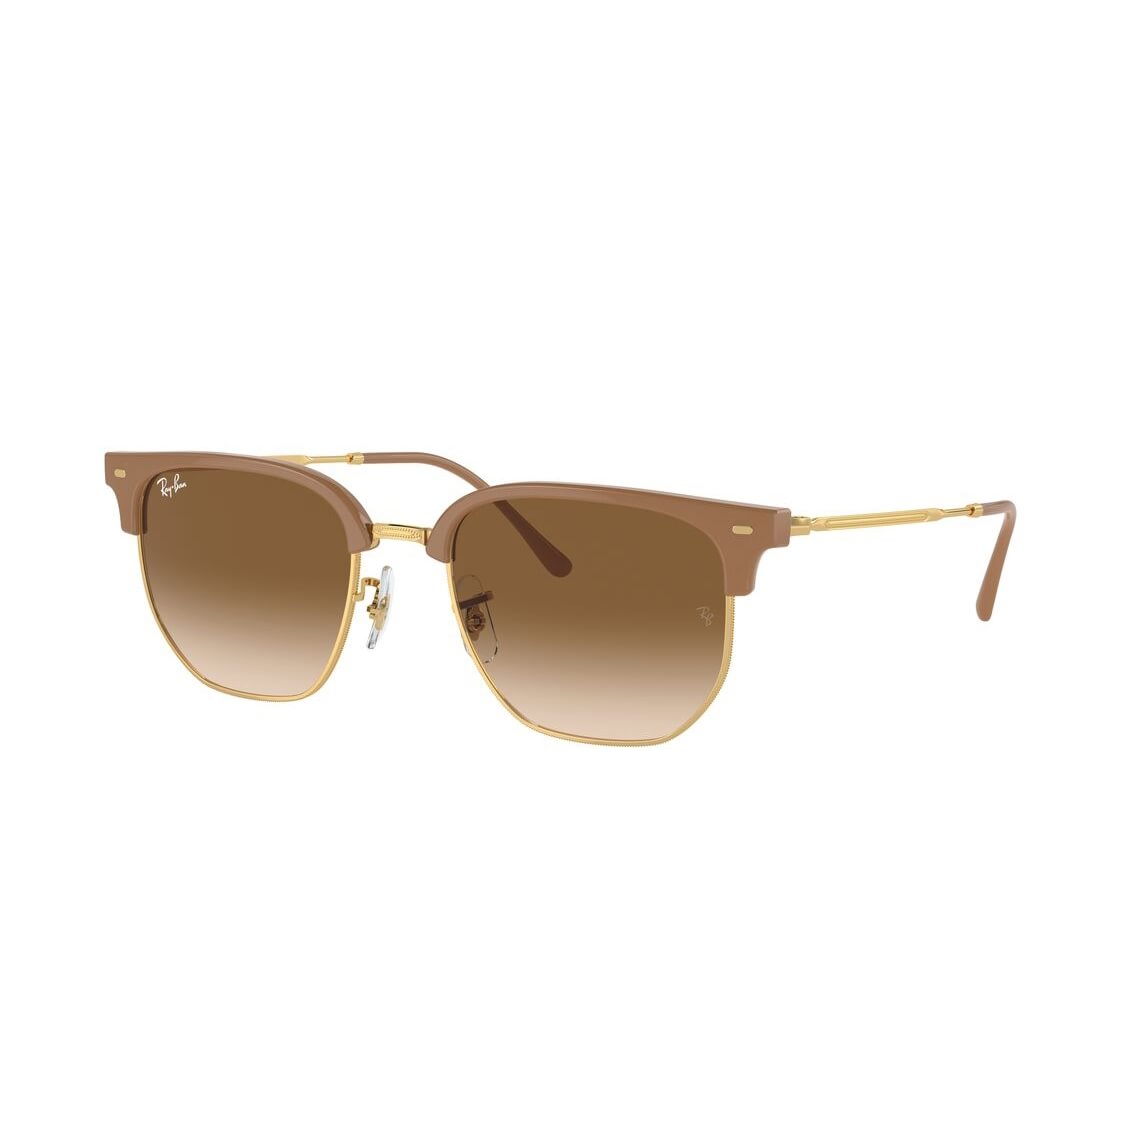 Ray-Ban New Clubmaster RB4416 672151 5320